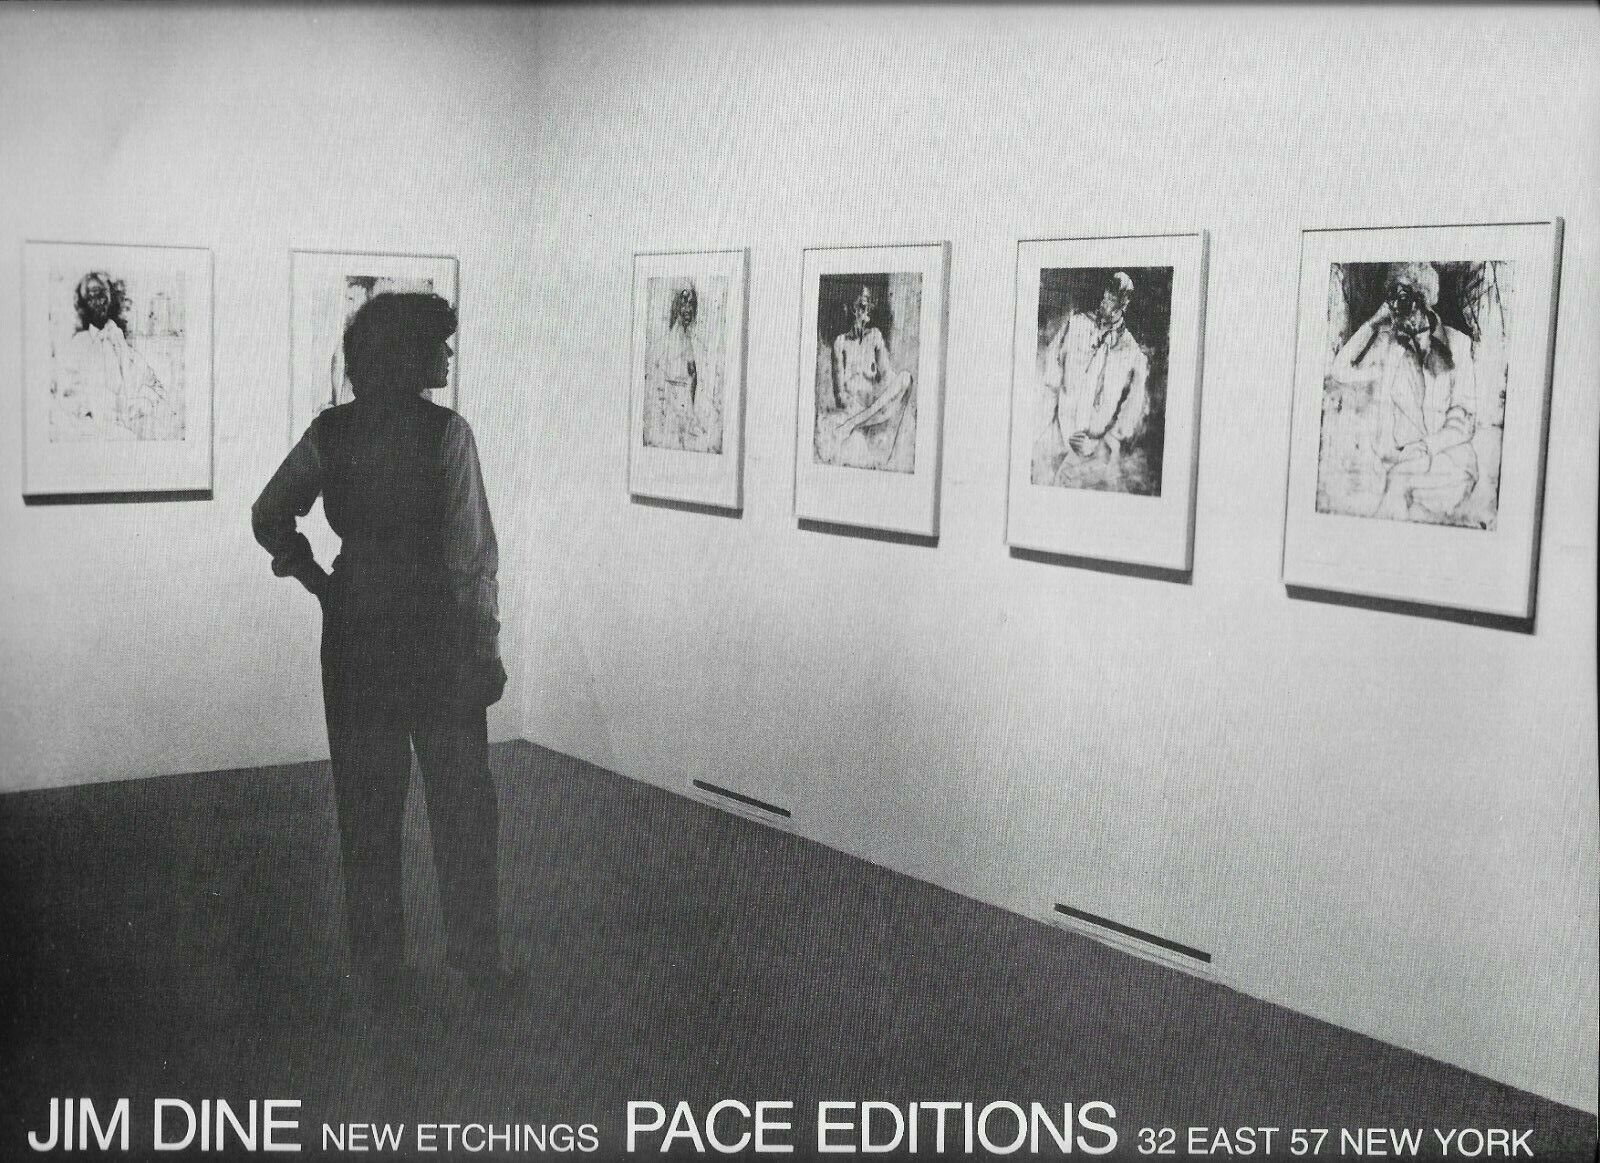 1979 Jim Dine New Etchings Pace Edition NYC Art Gallery original print ad